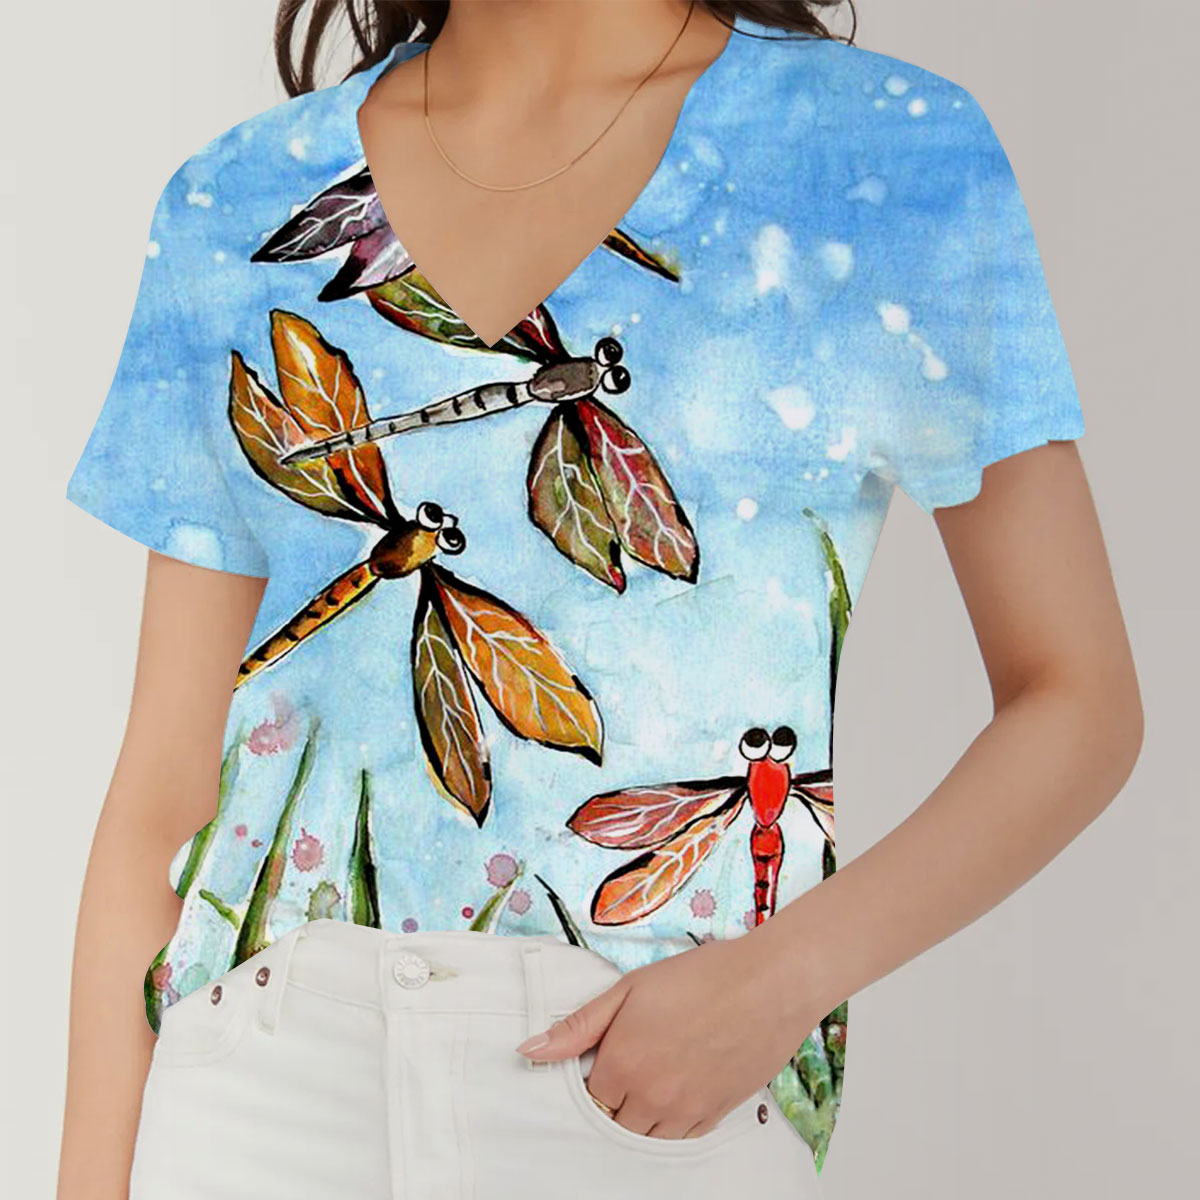 Water Color Dragonfly V-Neck Women's T-Shirt